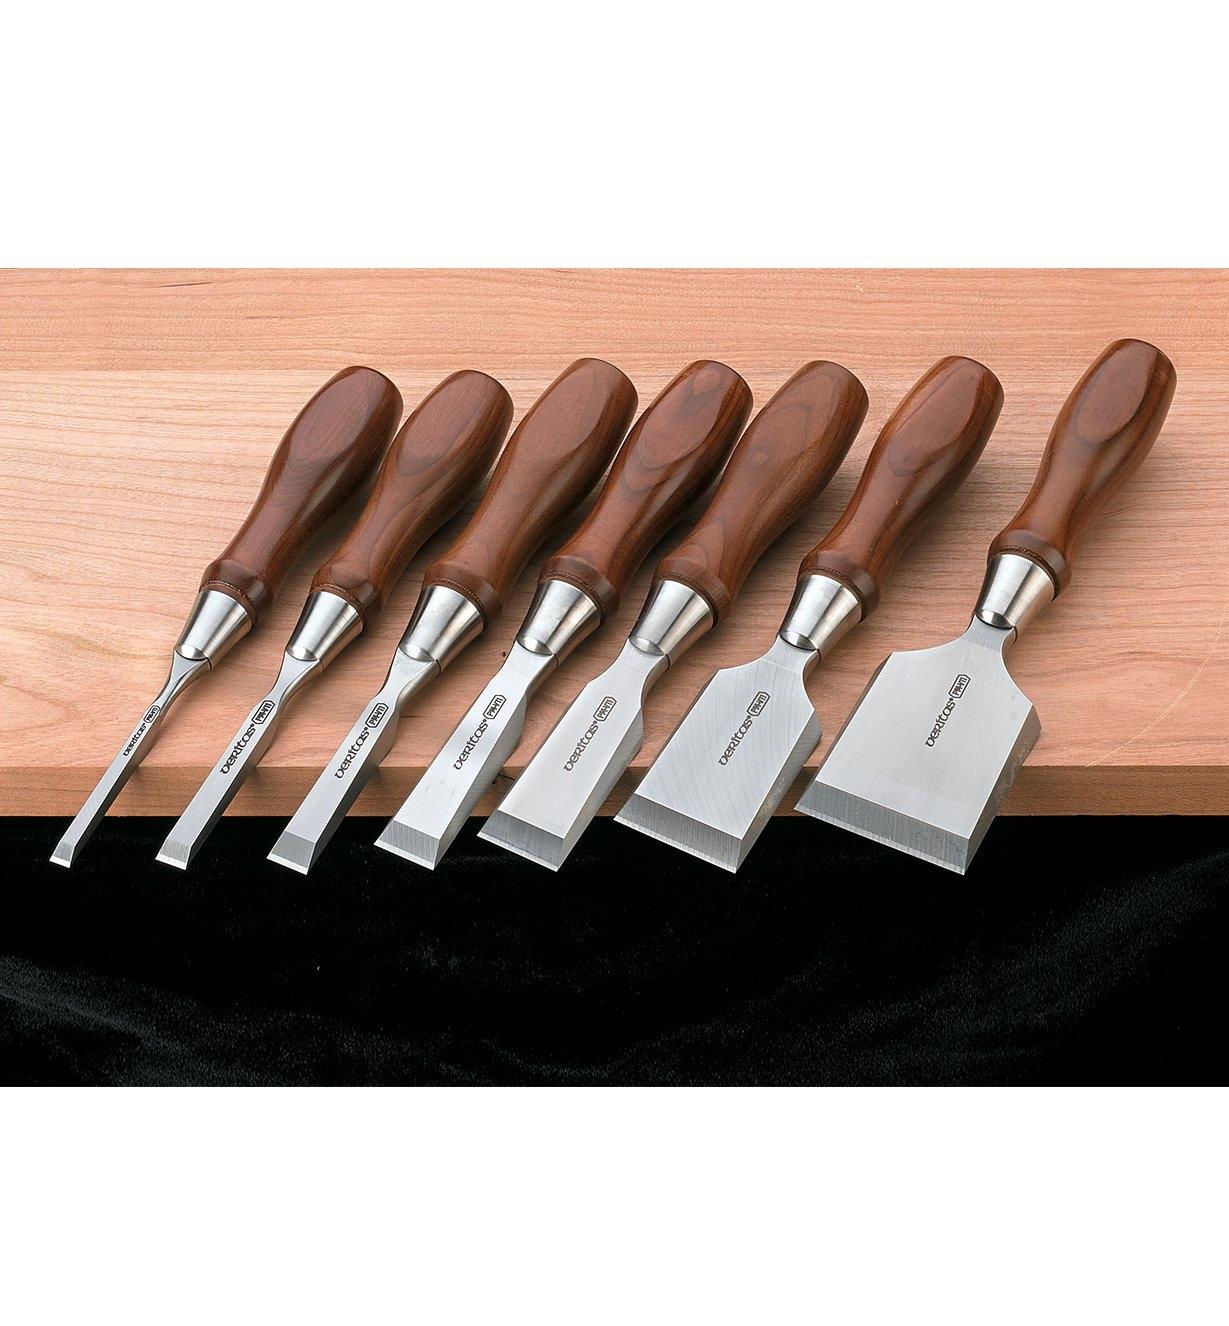 05S2665 - Set of 7 Veritas PM-V11 Butt Chisels (all sizes)